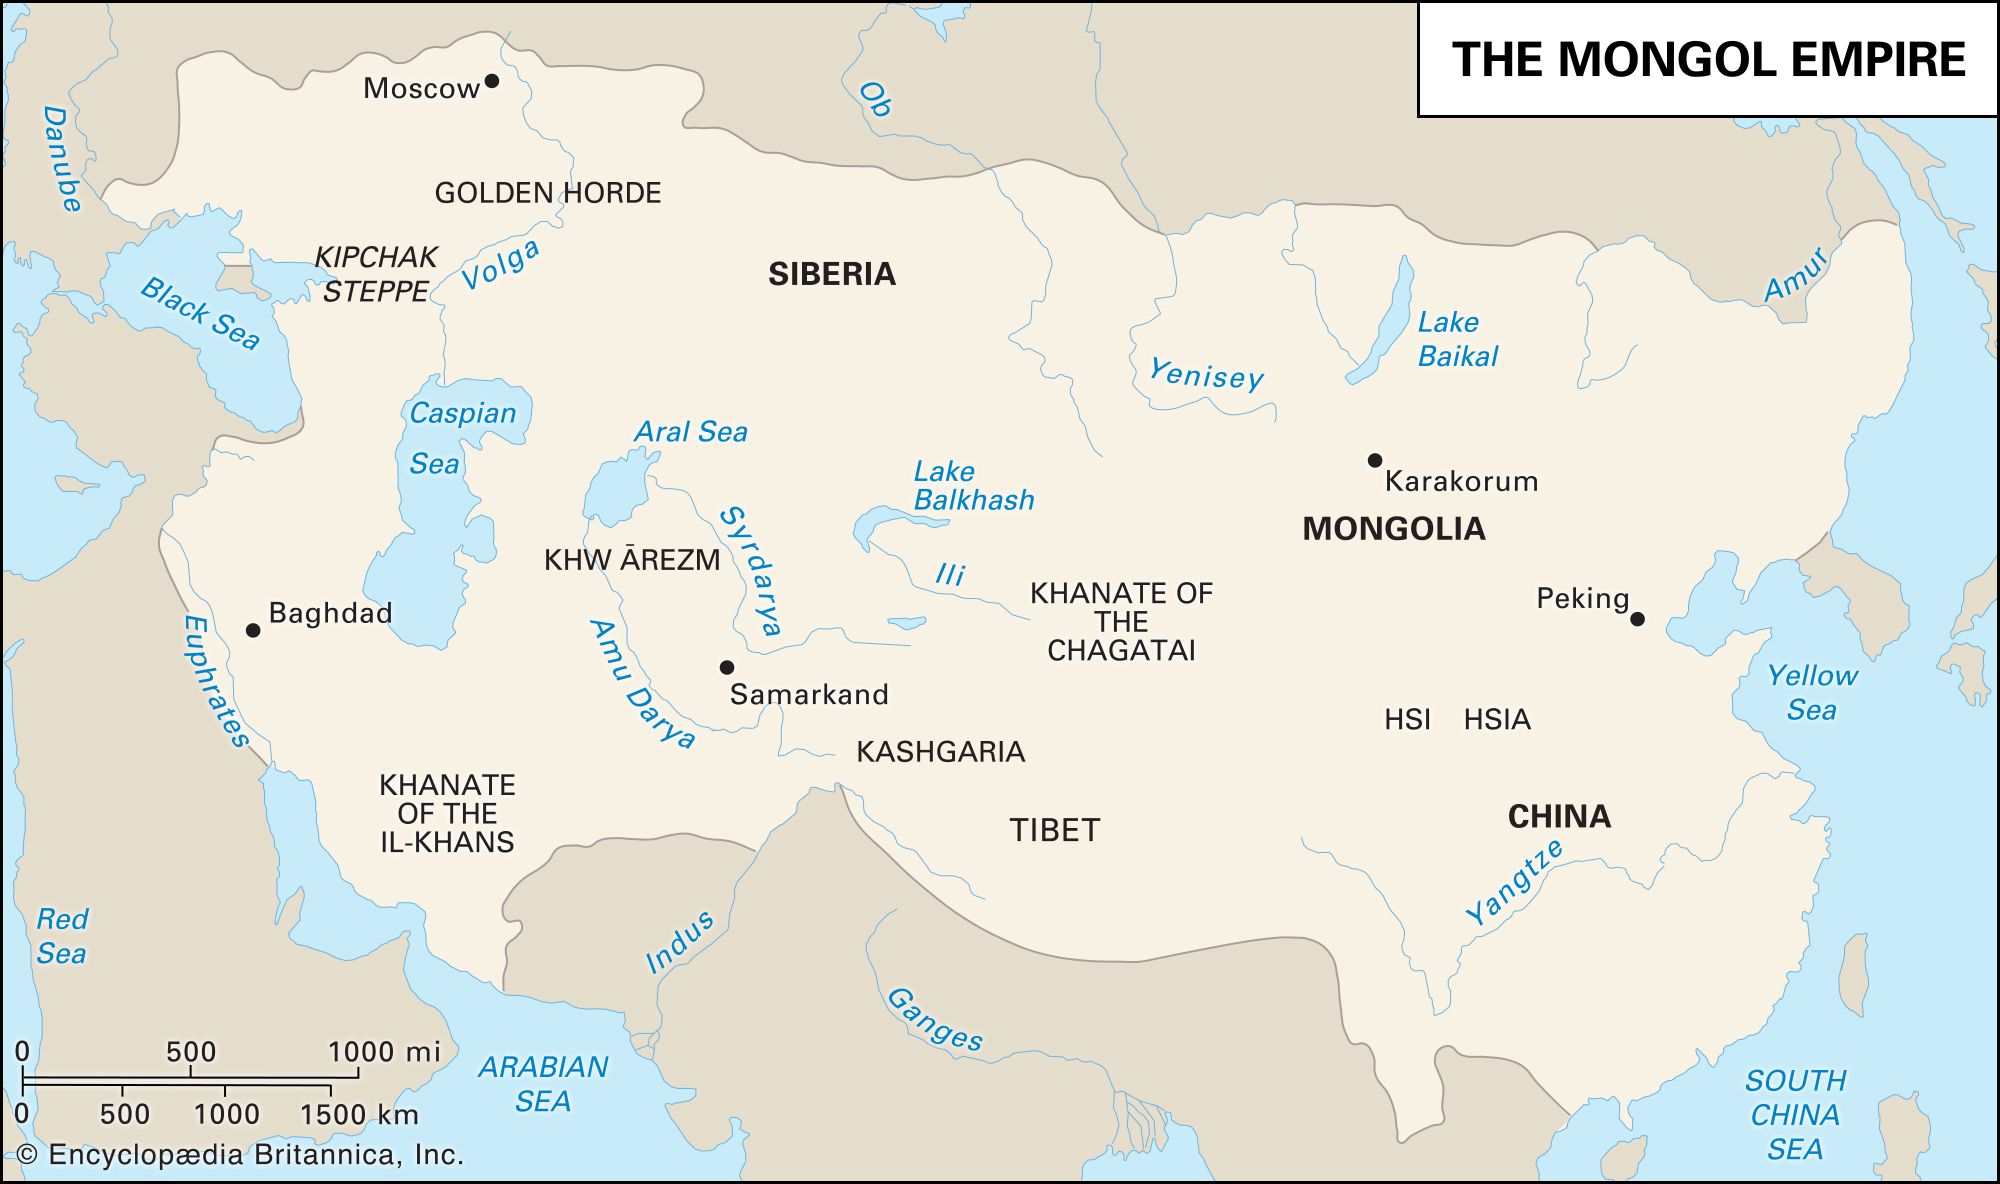 The Mongol Empire: History, Timeline & Facts